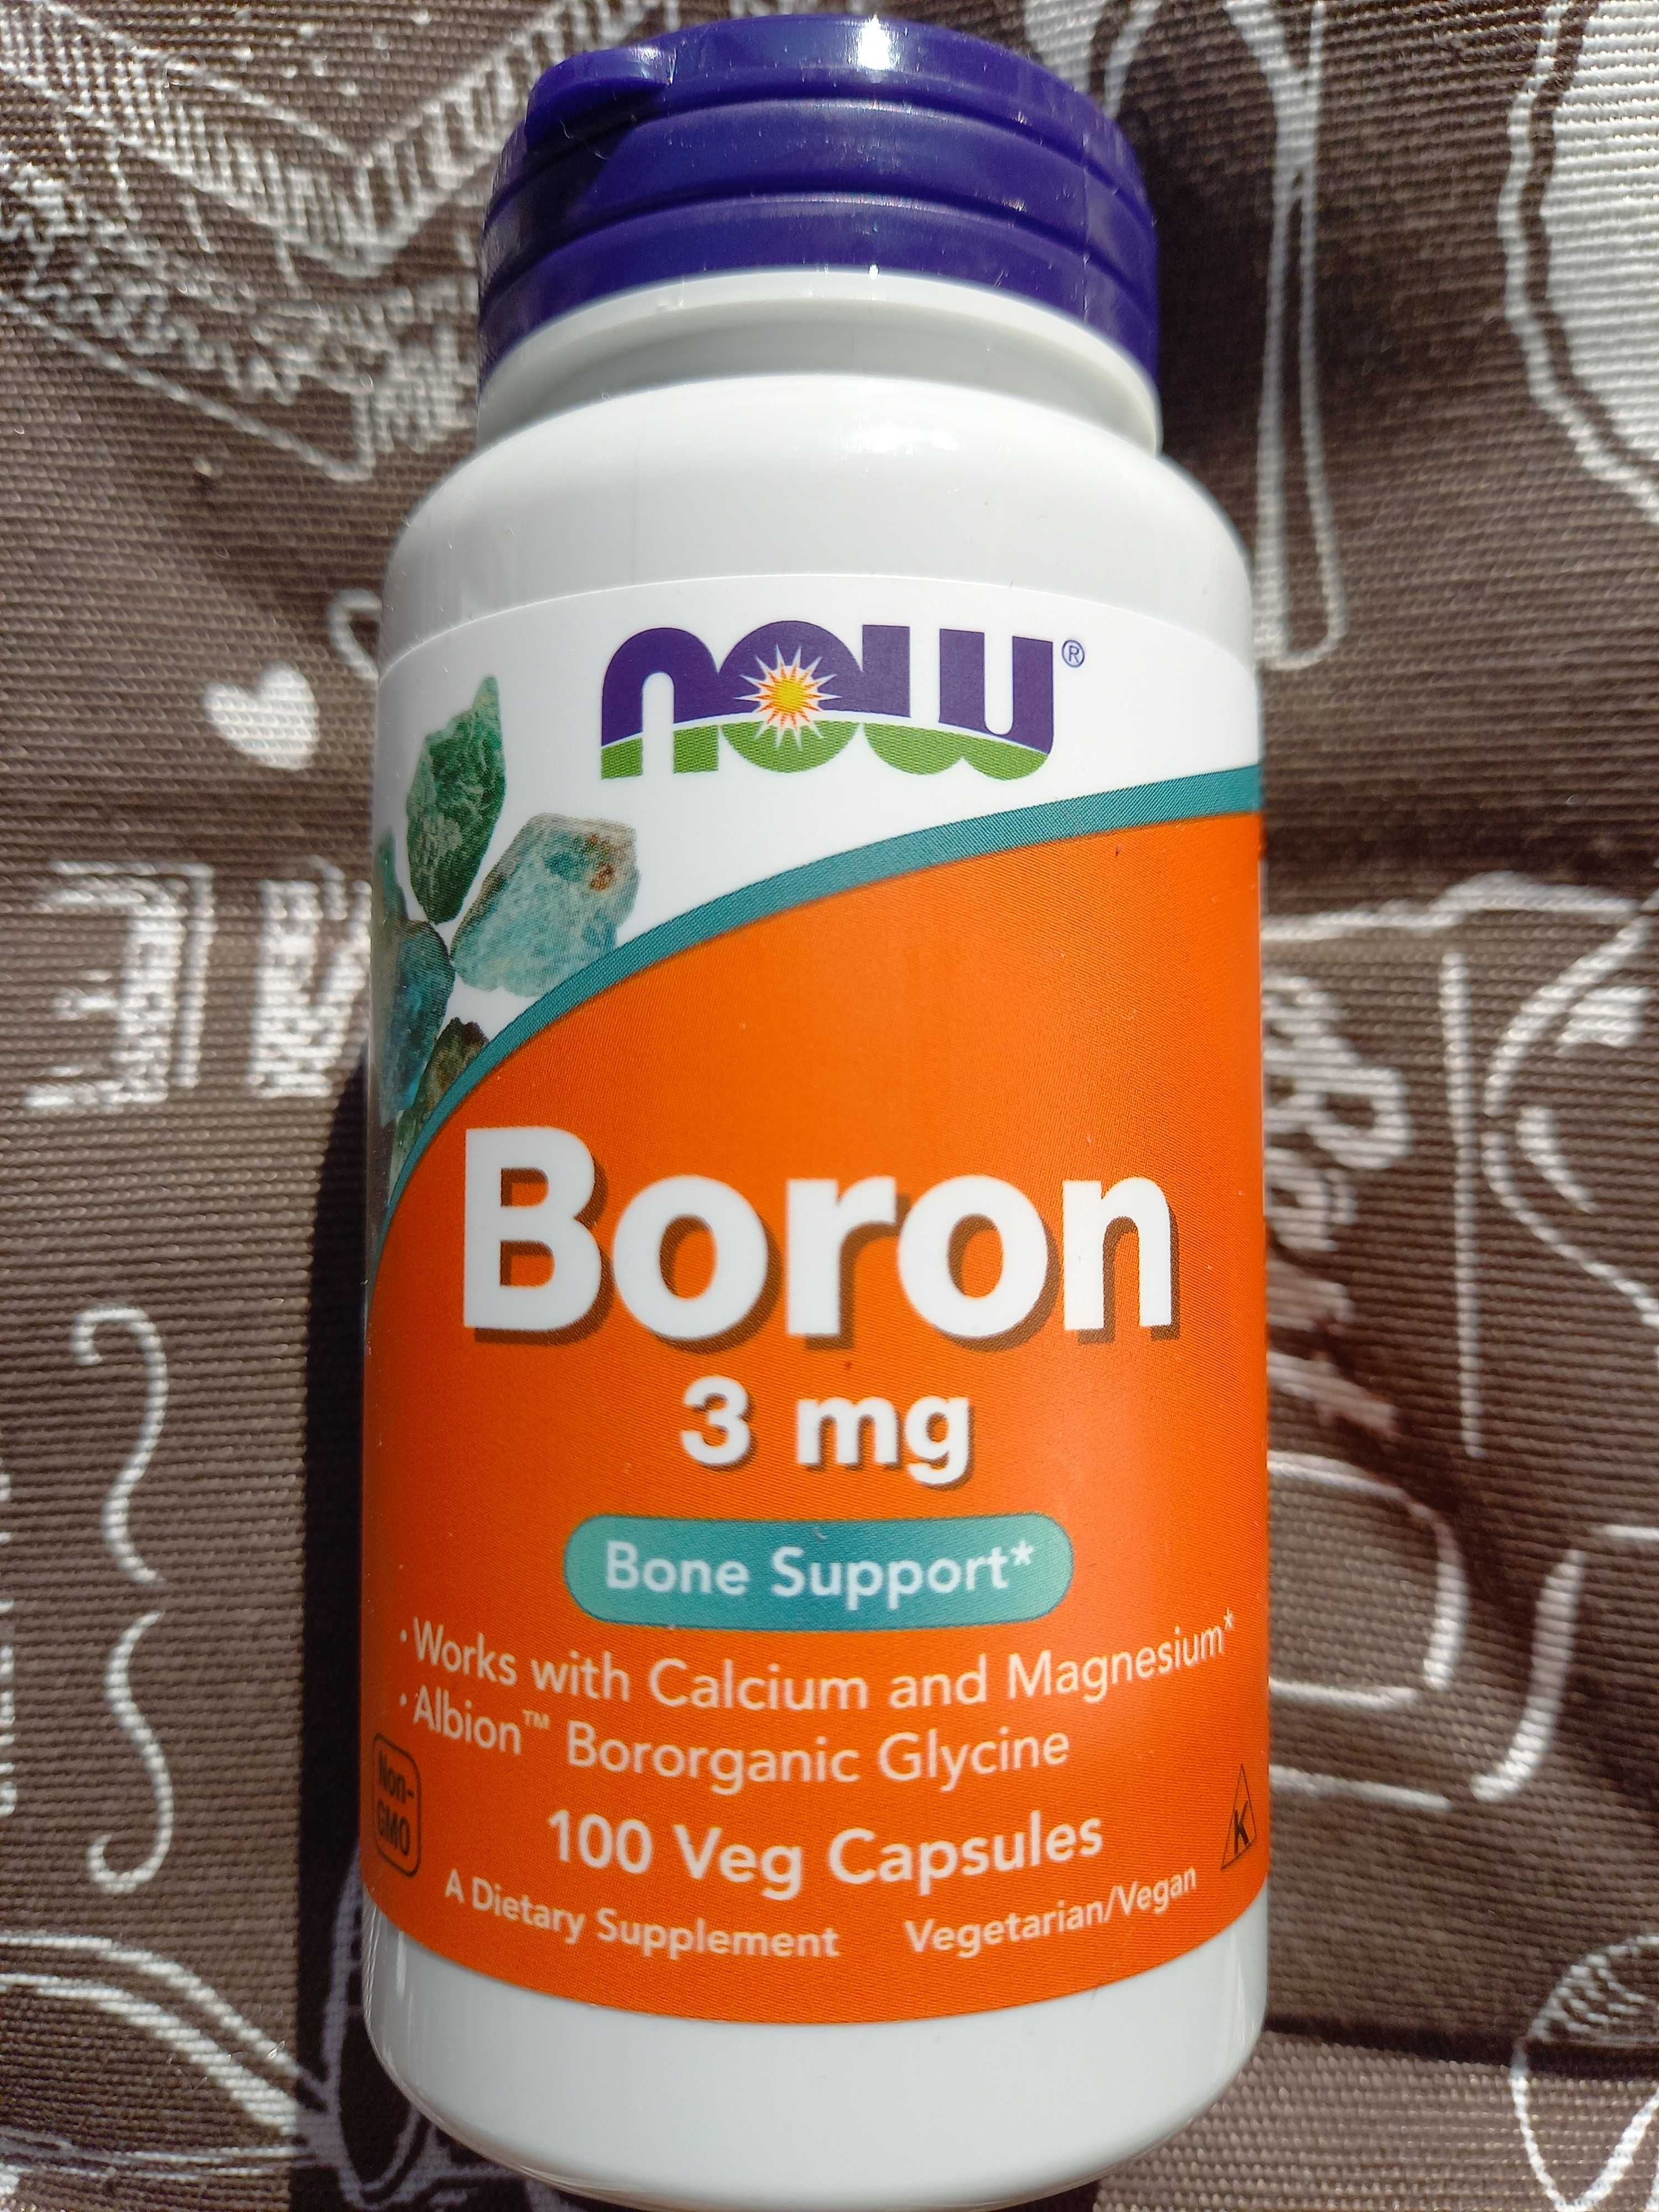 NOW Foods Life Extension Бор Boron Борон 3 mg 100 250 капсул